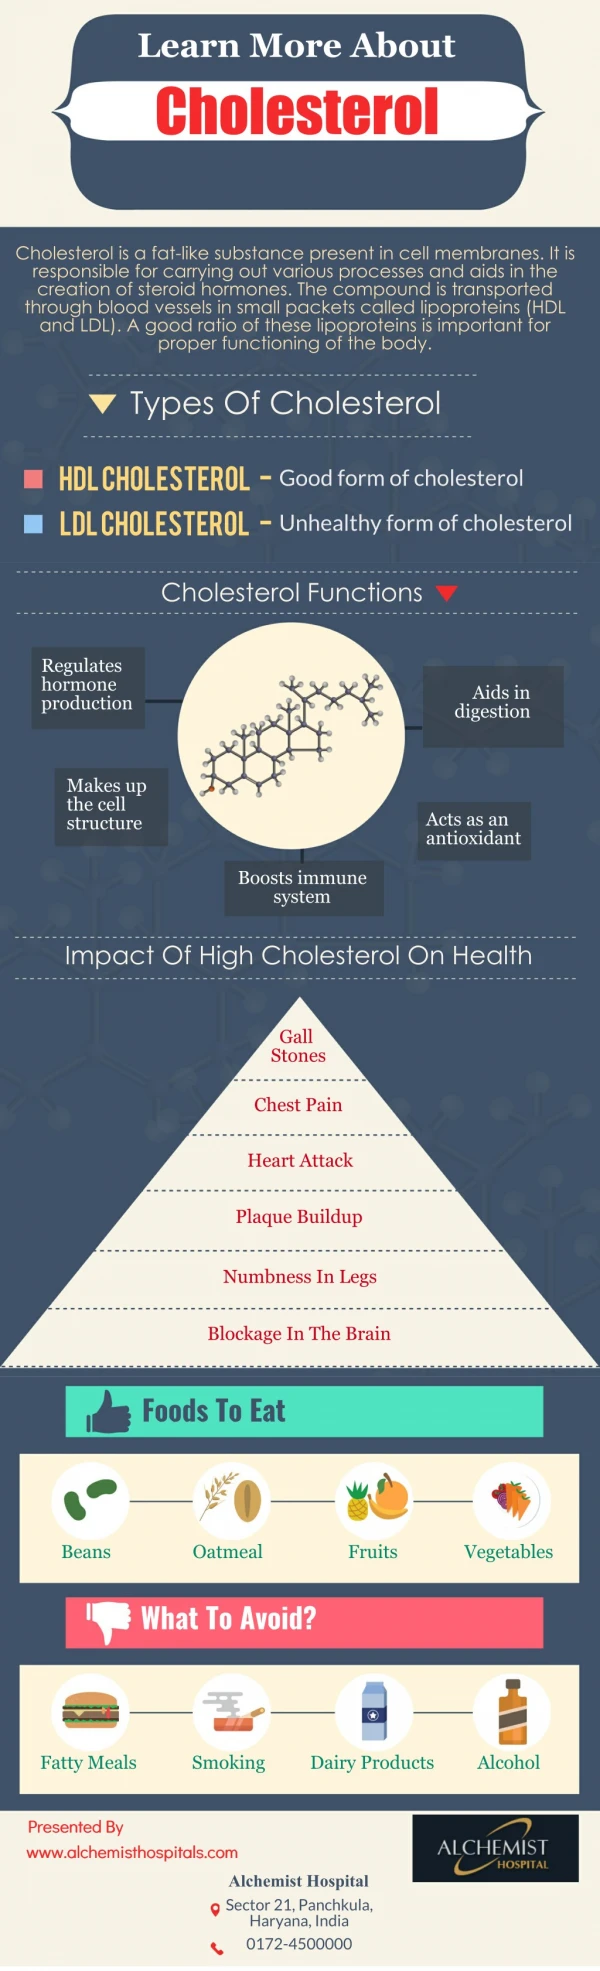 Learn More About Cholesterol